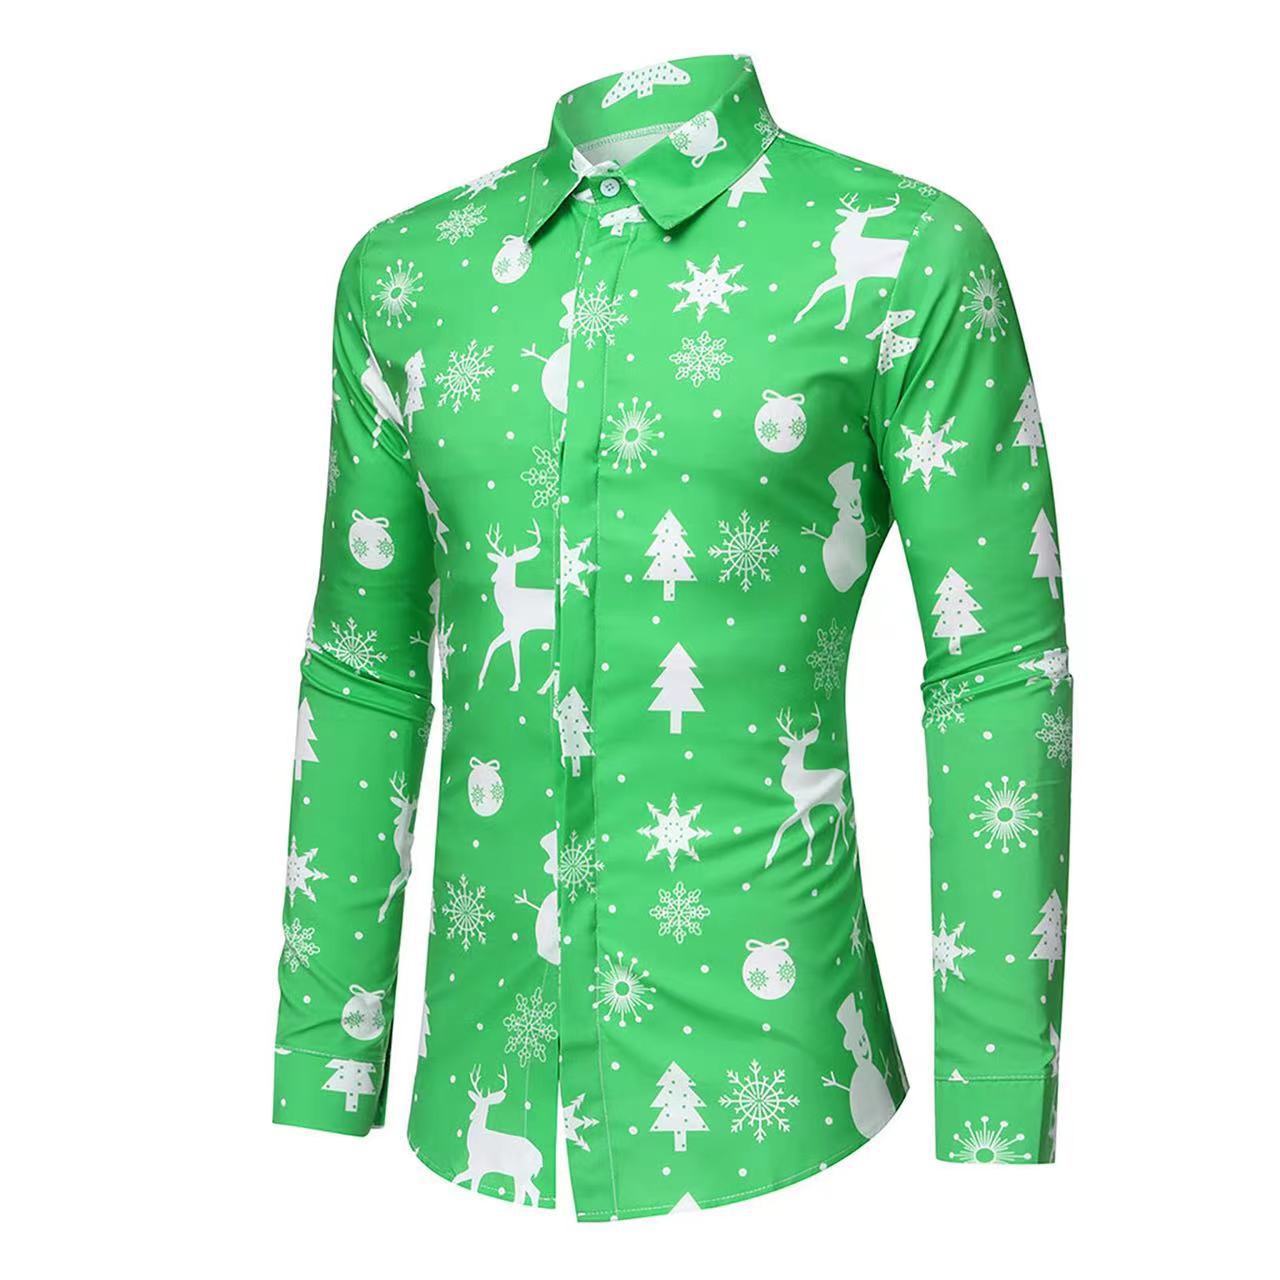 Sleigh Bells & Palm Trees (Long Sleeves!): Embrace the holiday spirit with a quirky Hawaiian shirt that blends Christmas themes with a tropical vibe.